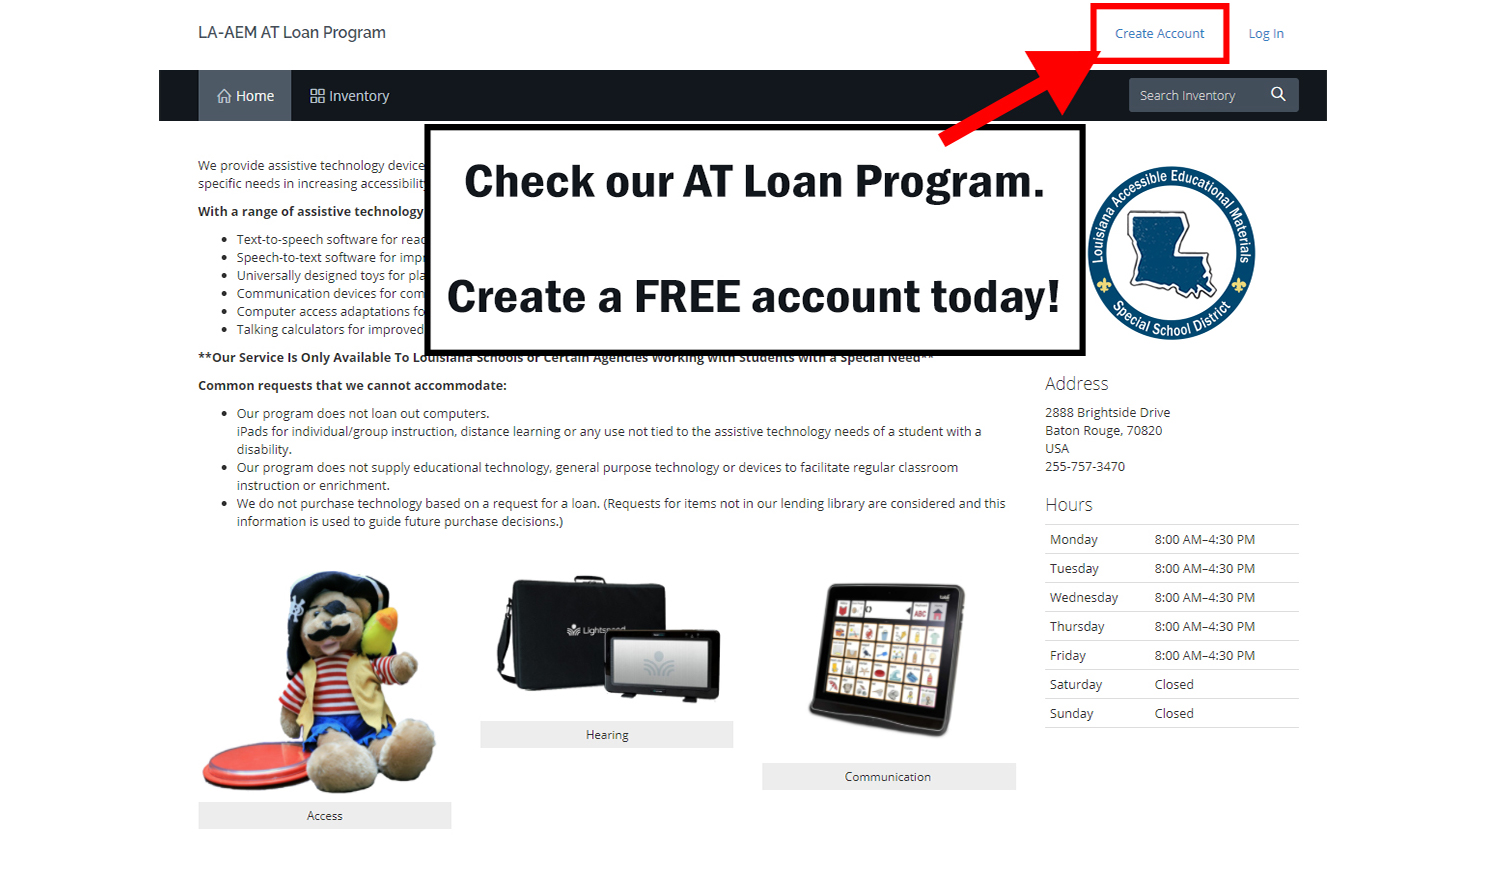 Sign Up for the AT Loan Program